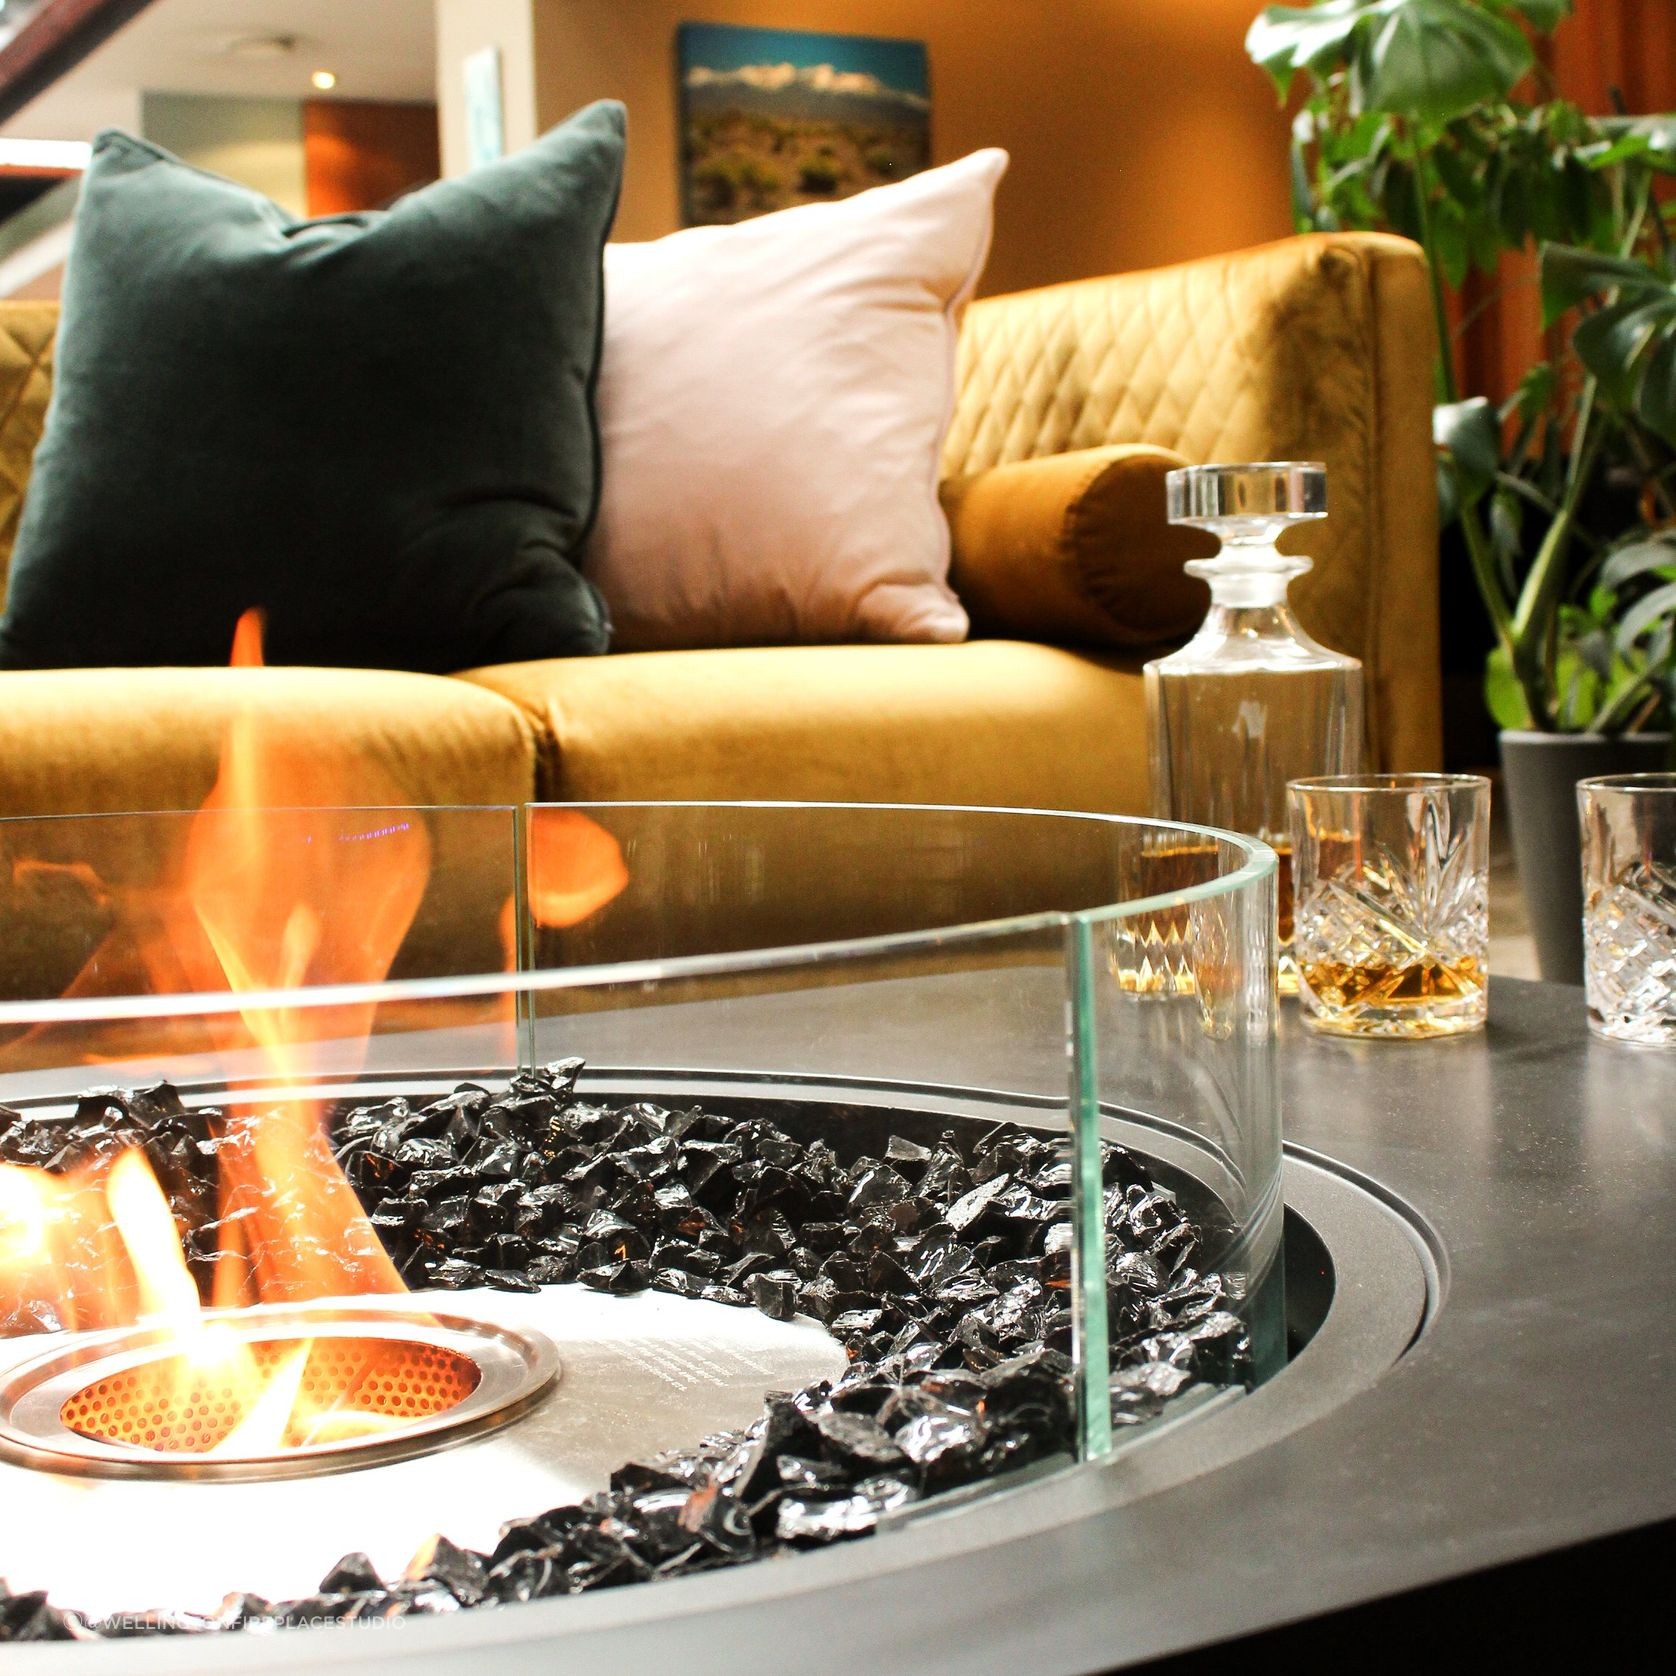 EcoSmart™ Martini 50 Compact Fire Table gallery detail image